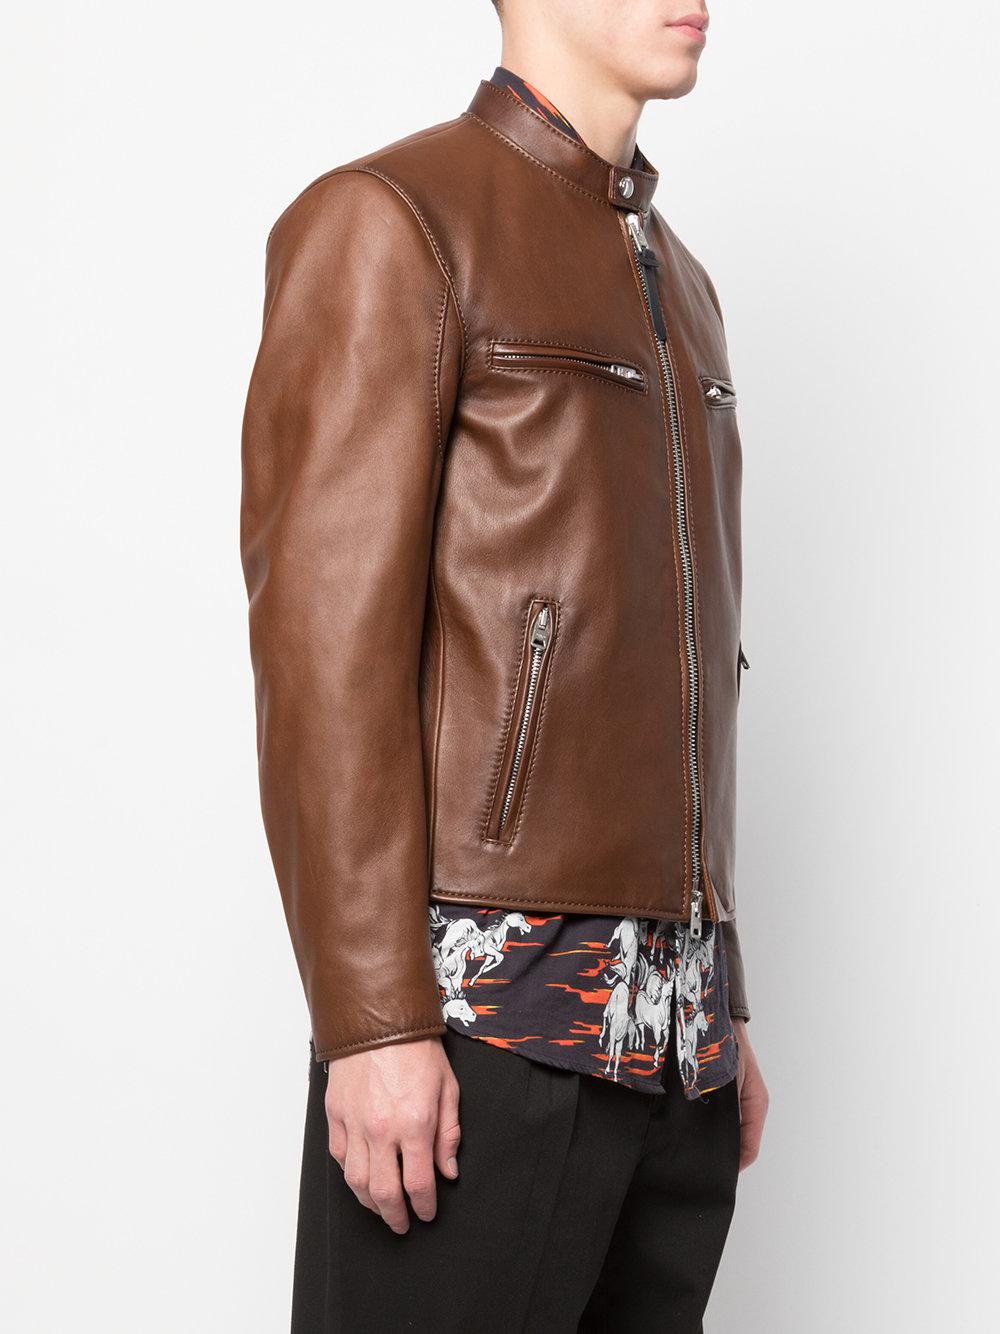 coach leather racer jacket > Purchase - 62%